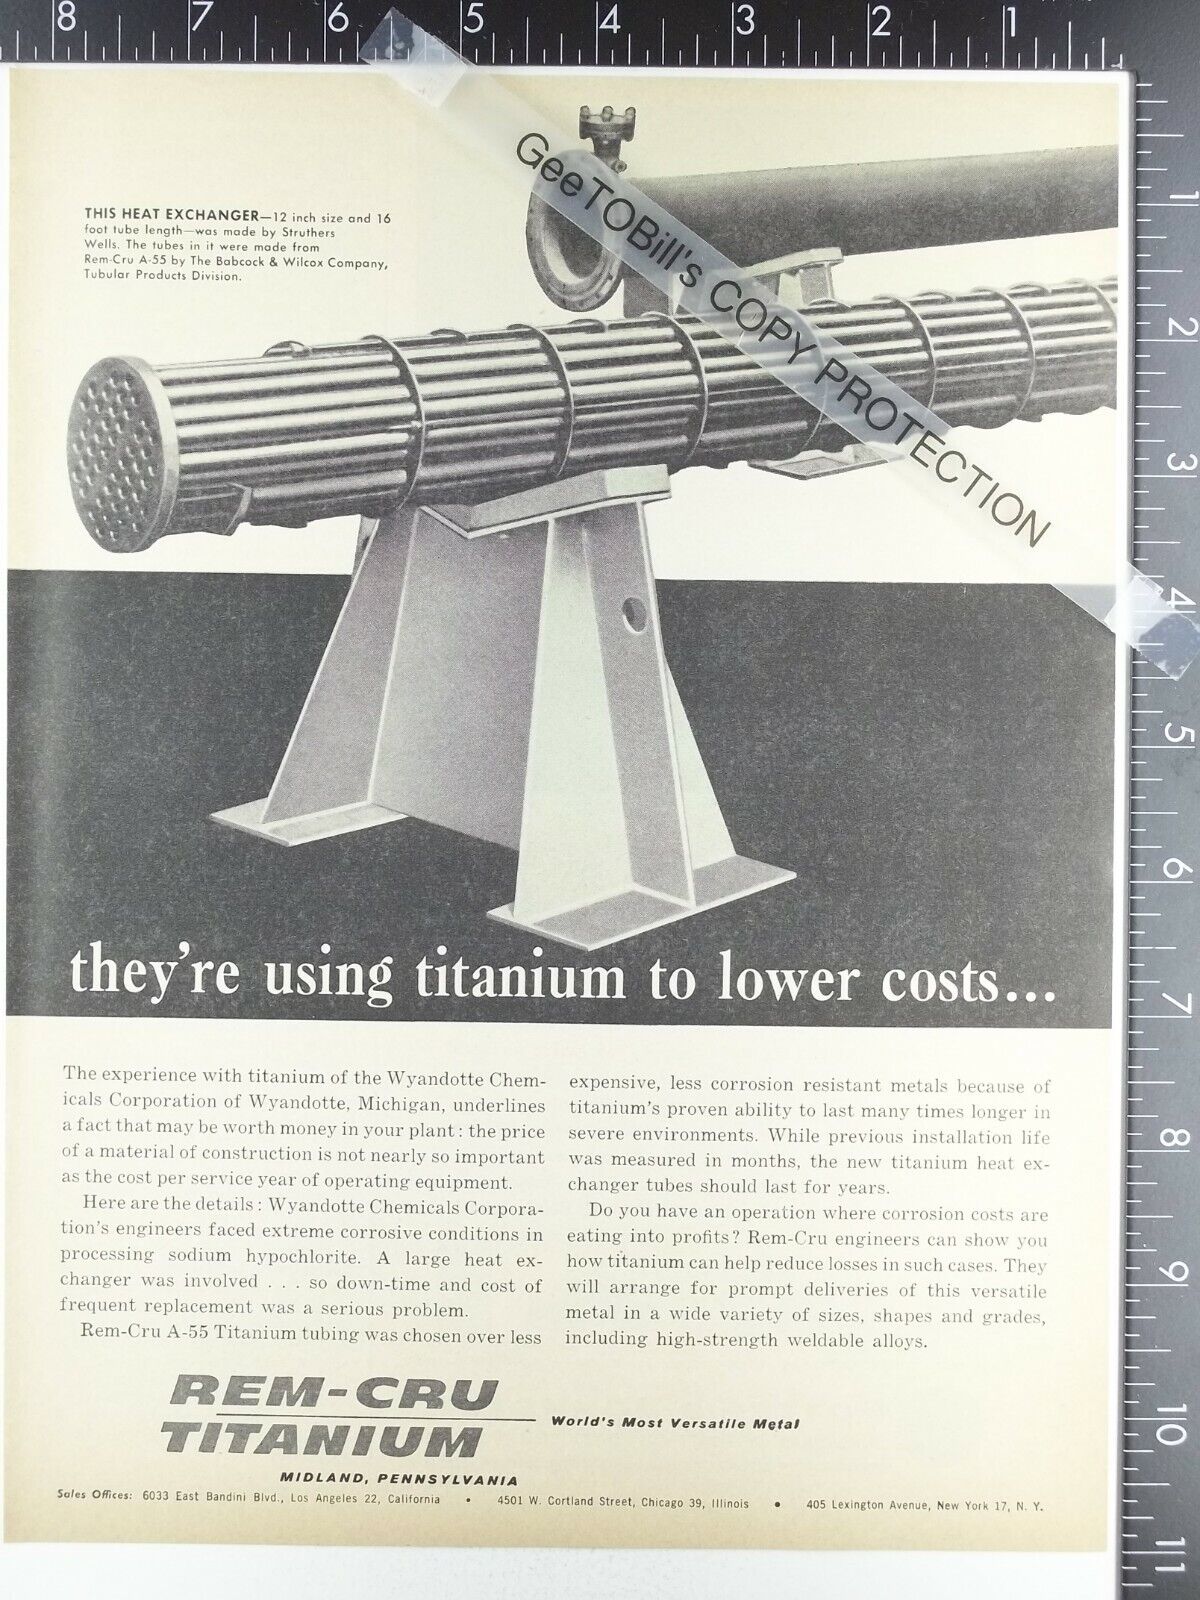 1957 AD for Rem Cru A-55 Titanium in Midland PA.  Struthers Wells heat exchanger